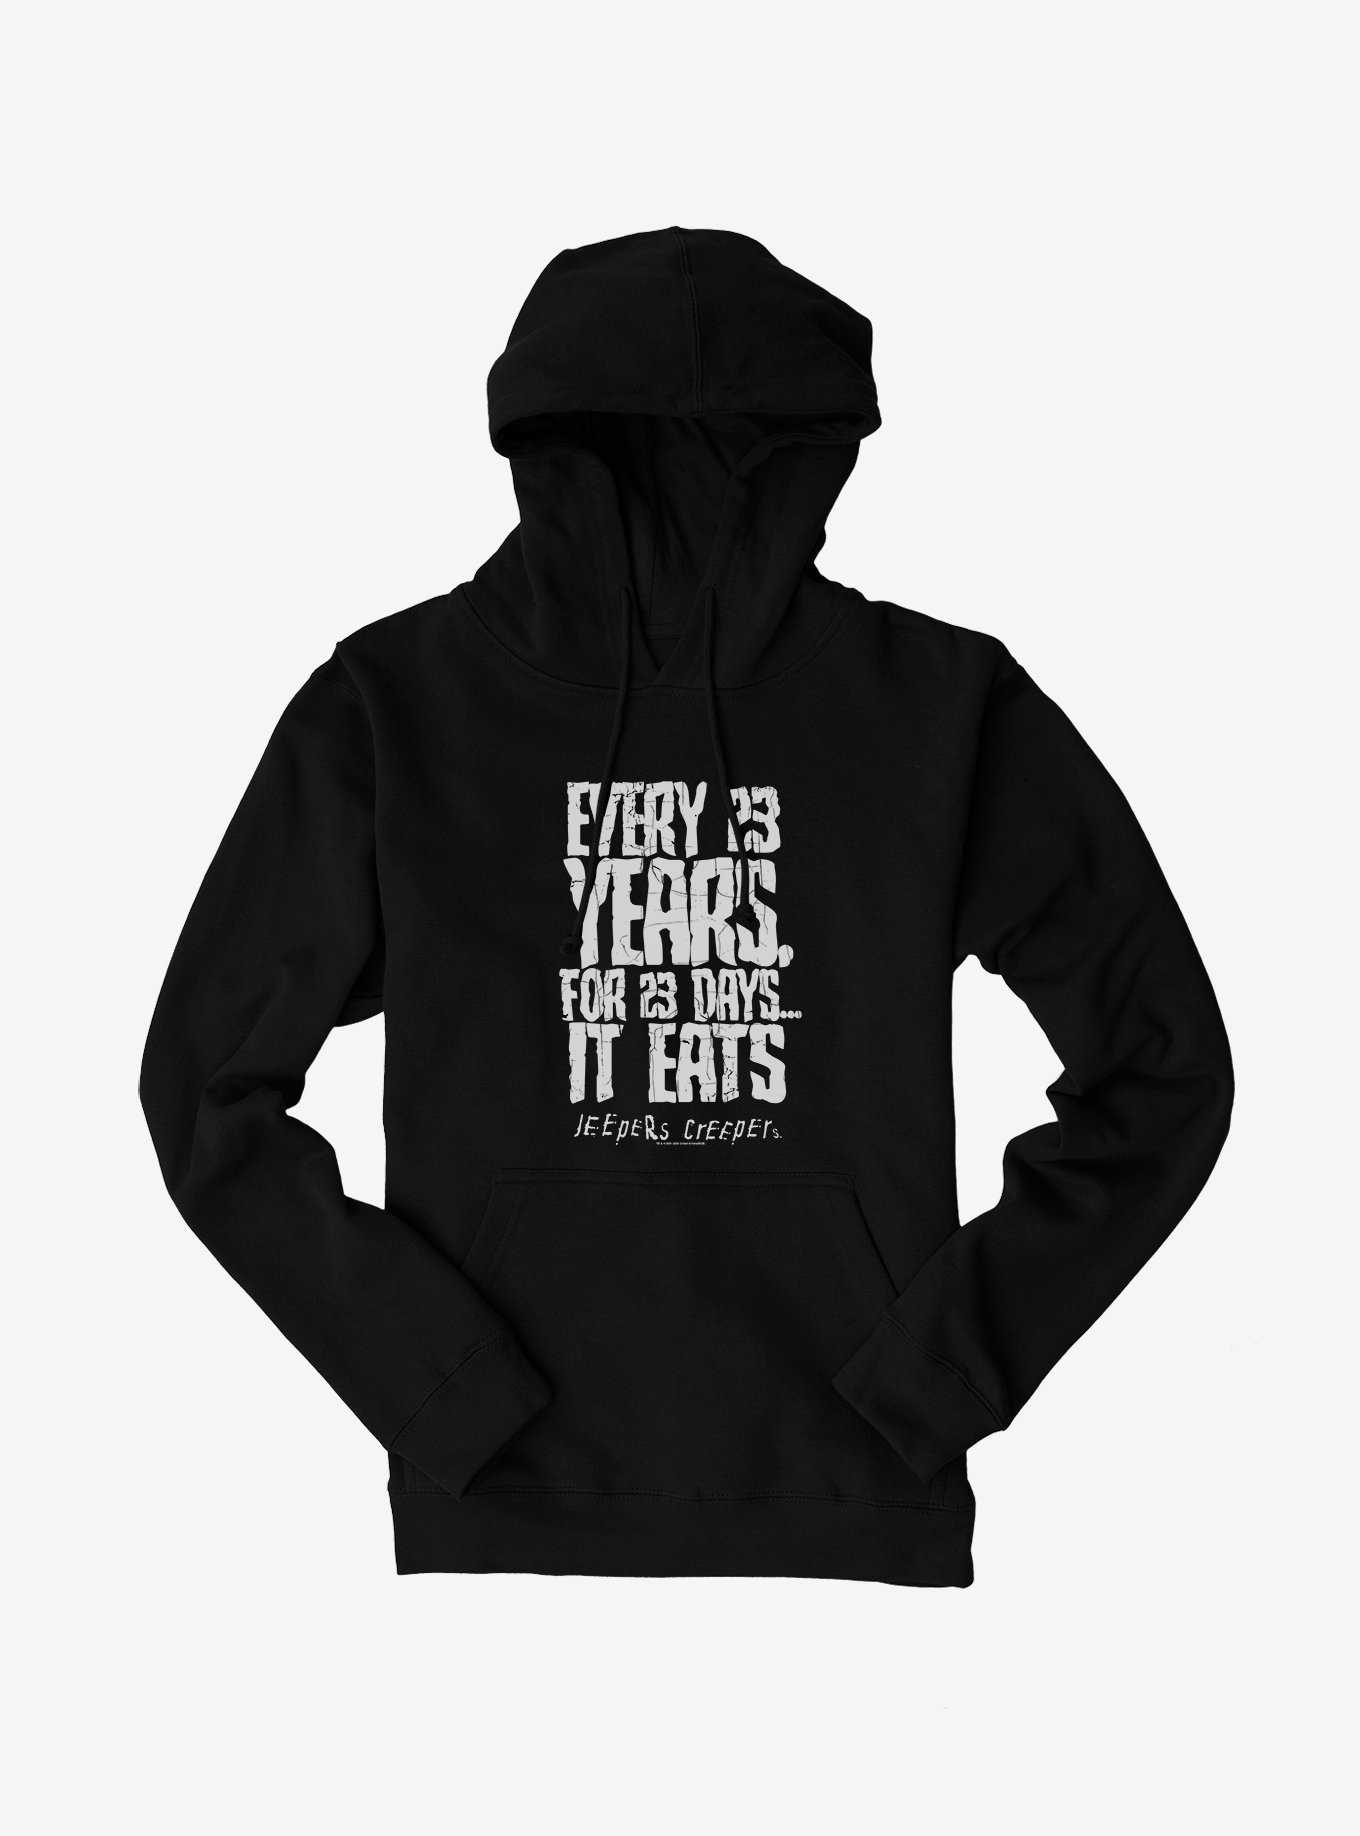 Jeepers Creepers 23 Years For 23 Days Hoodie, , hi-res